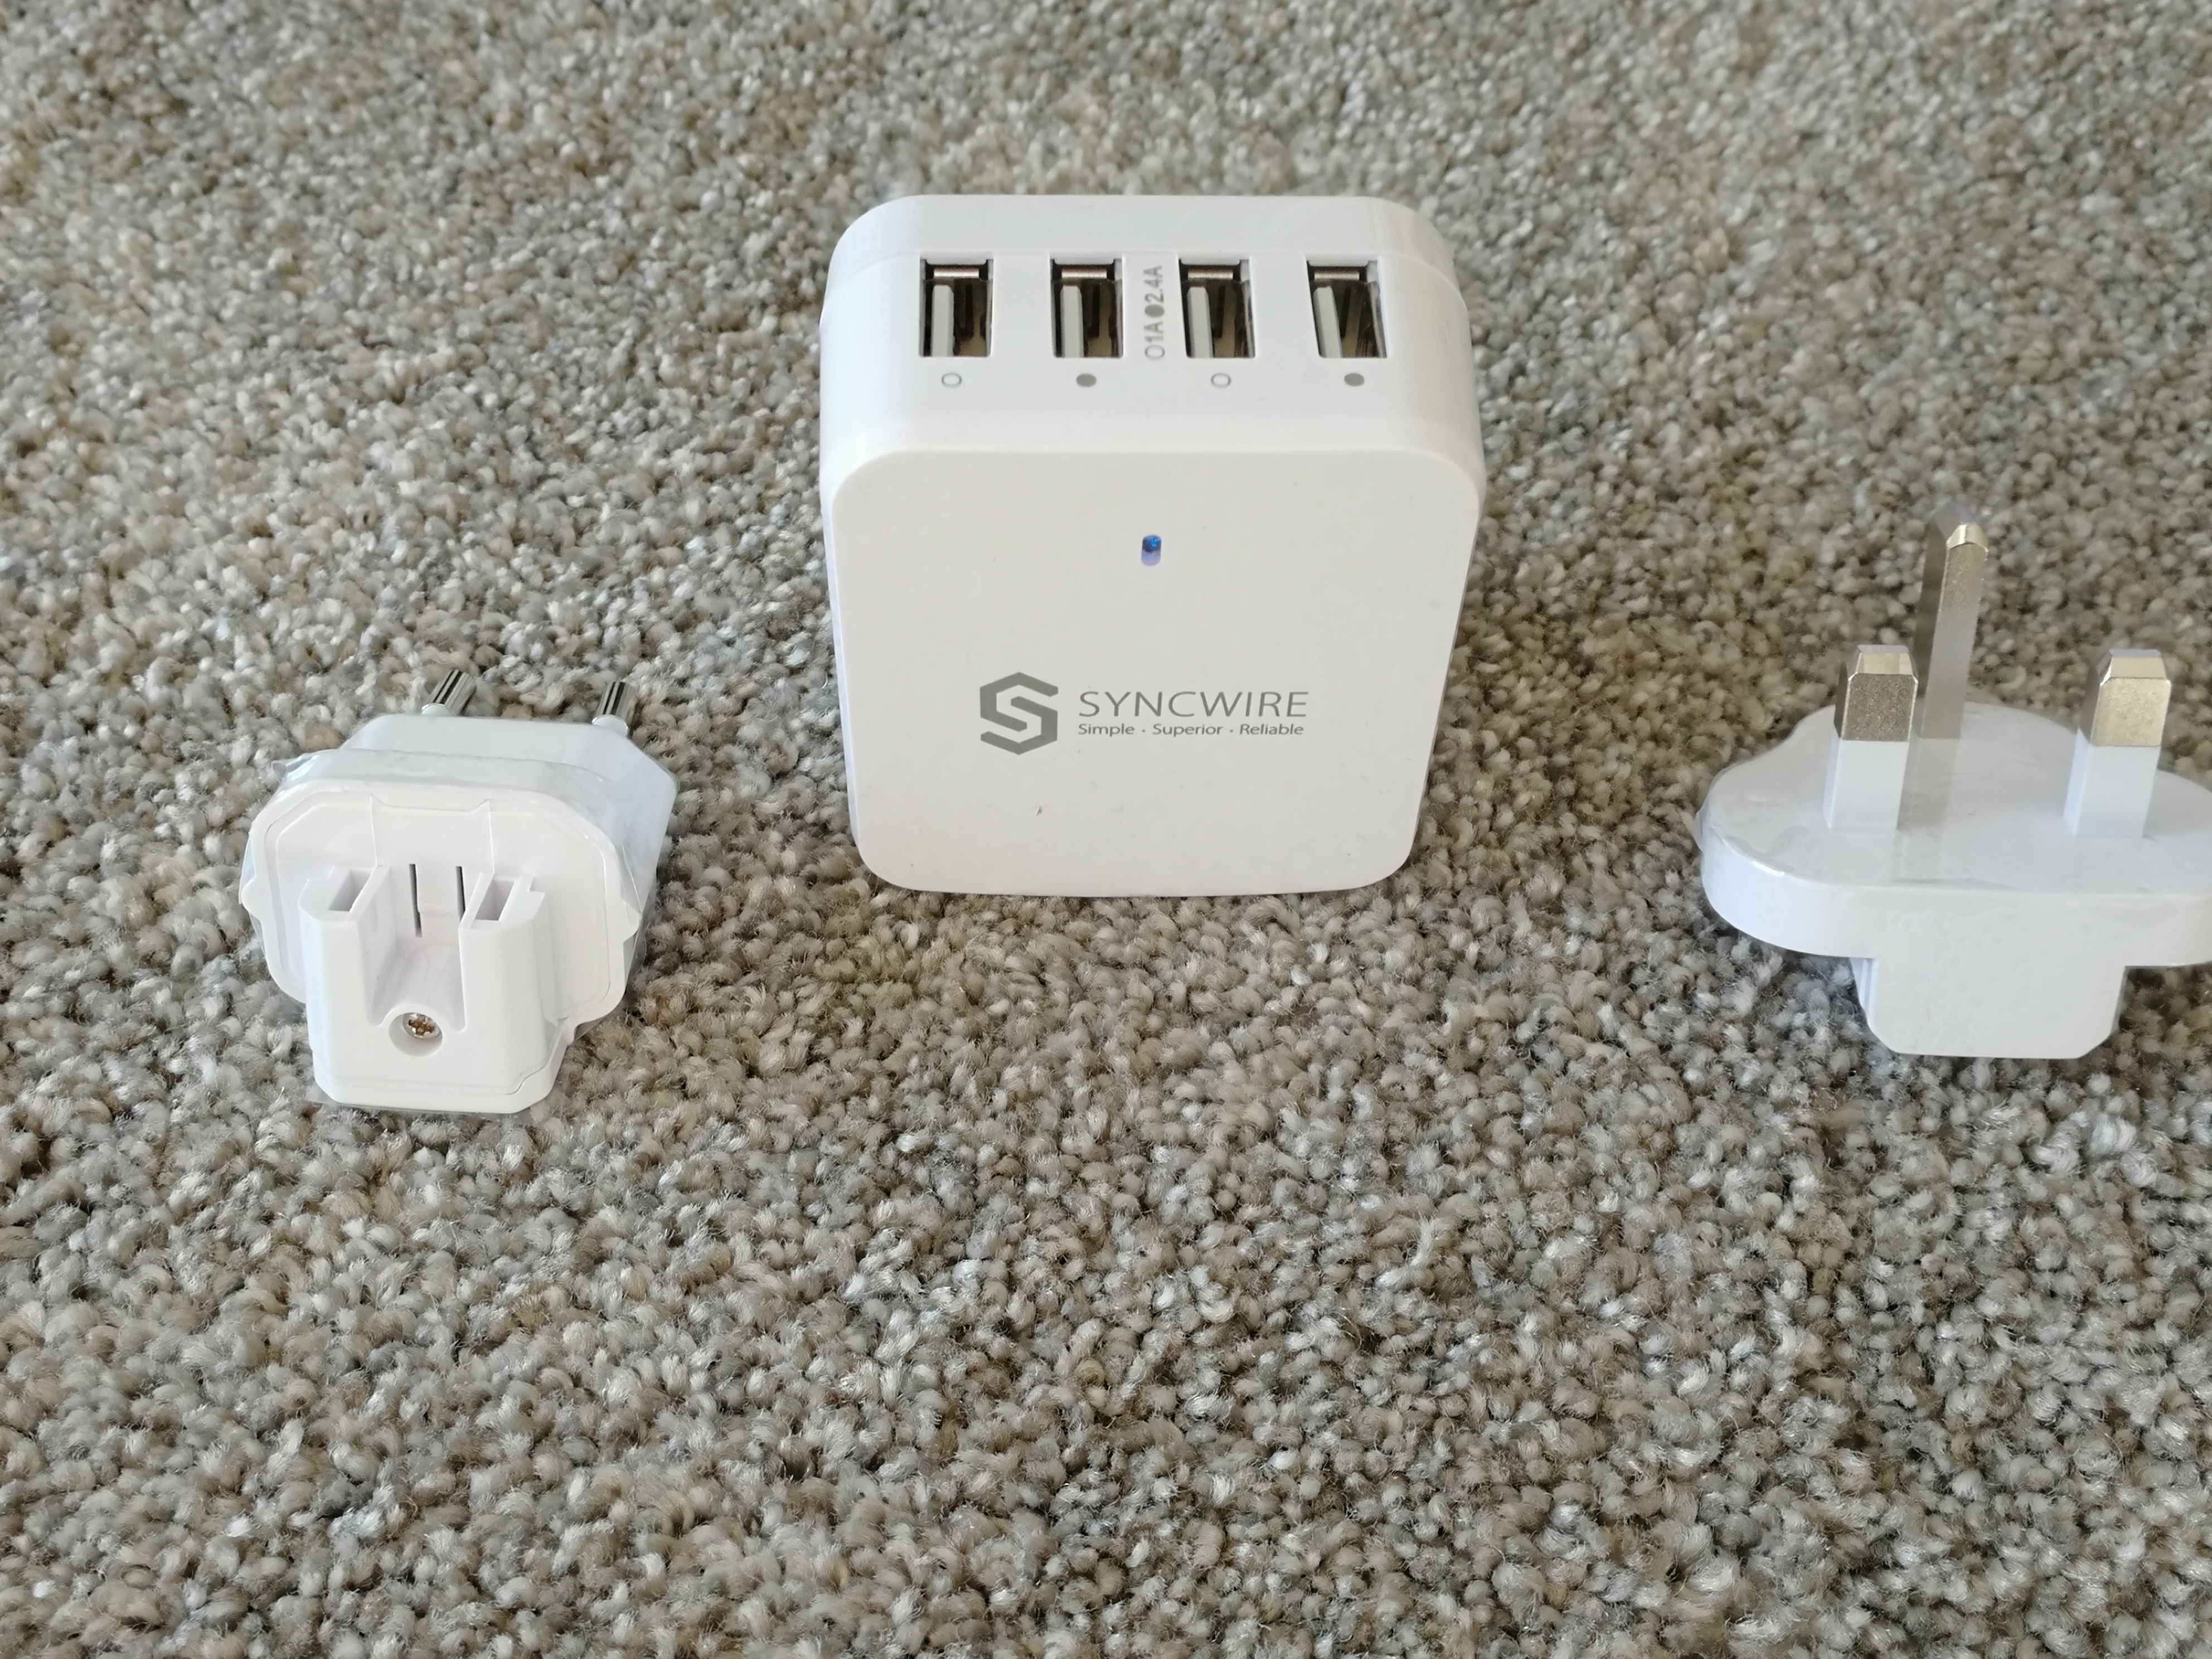 Syncwire 4-port mains charger - Review - Coolsmartphone